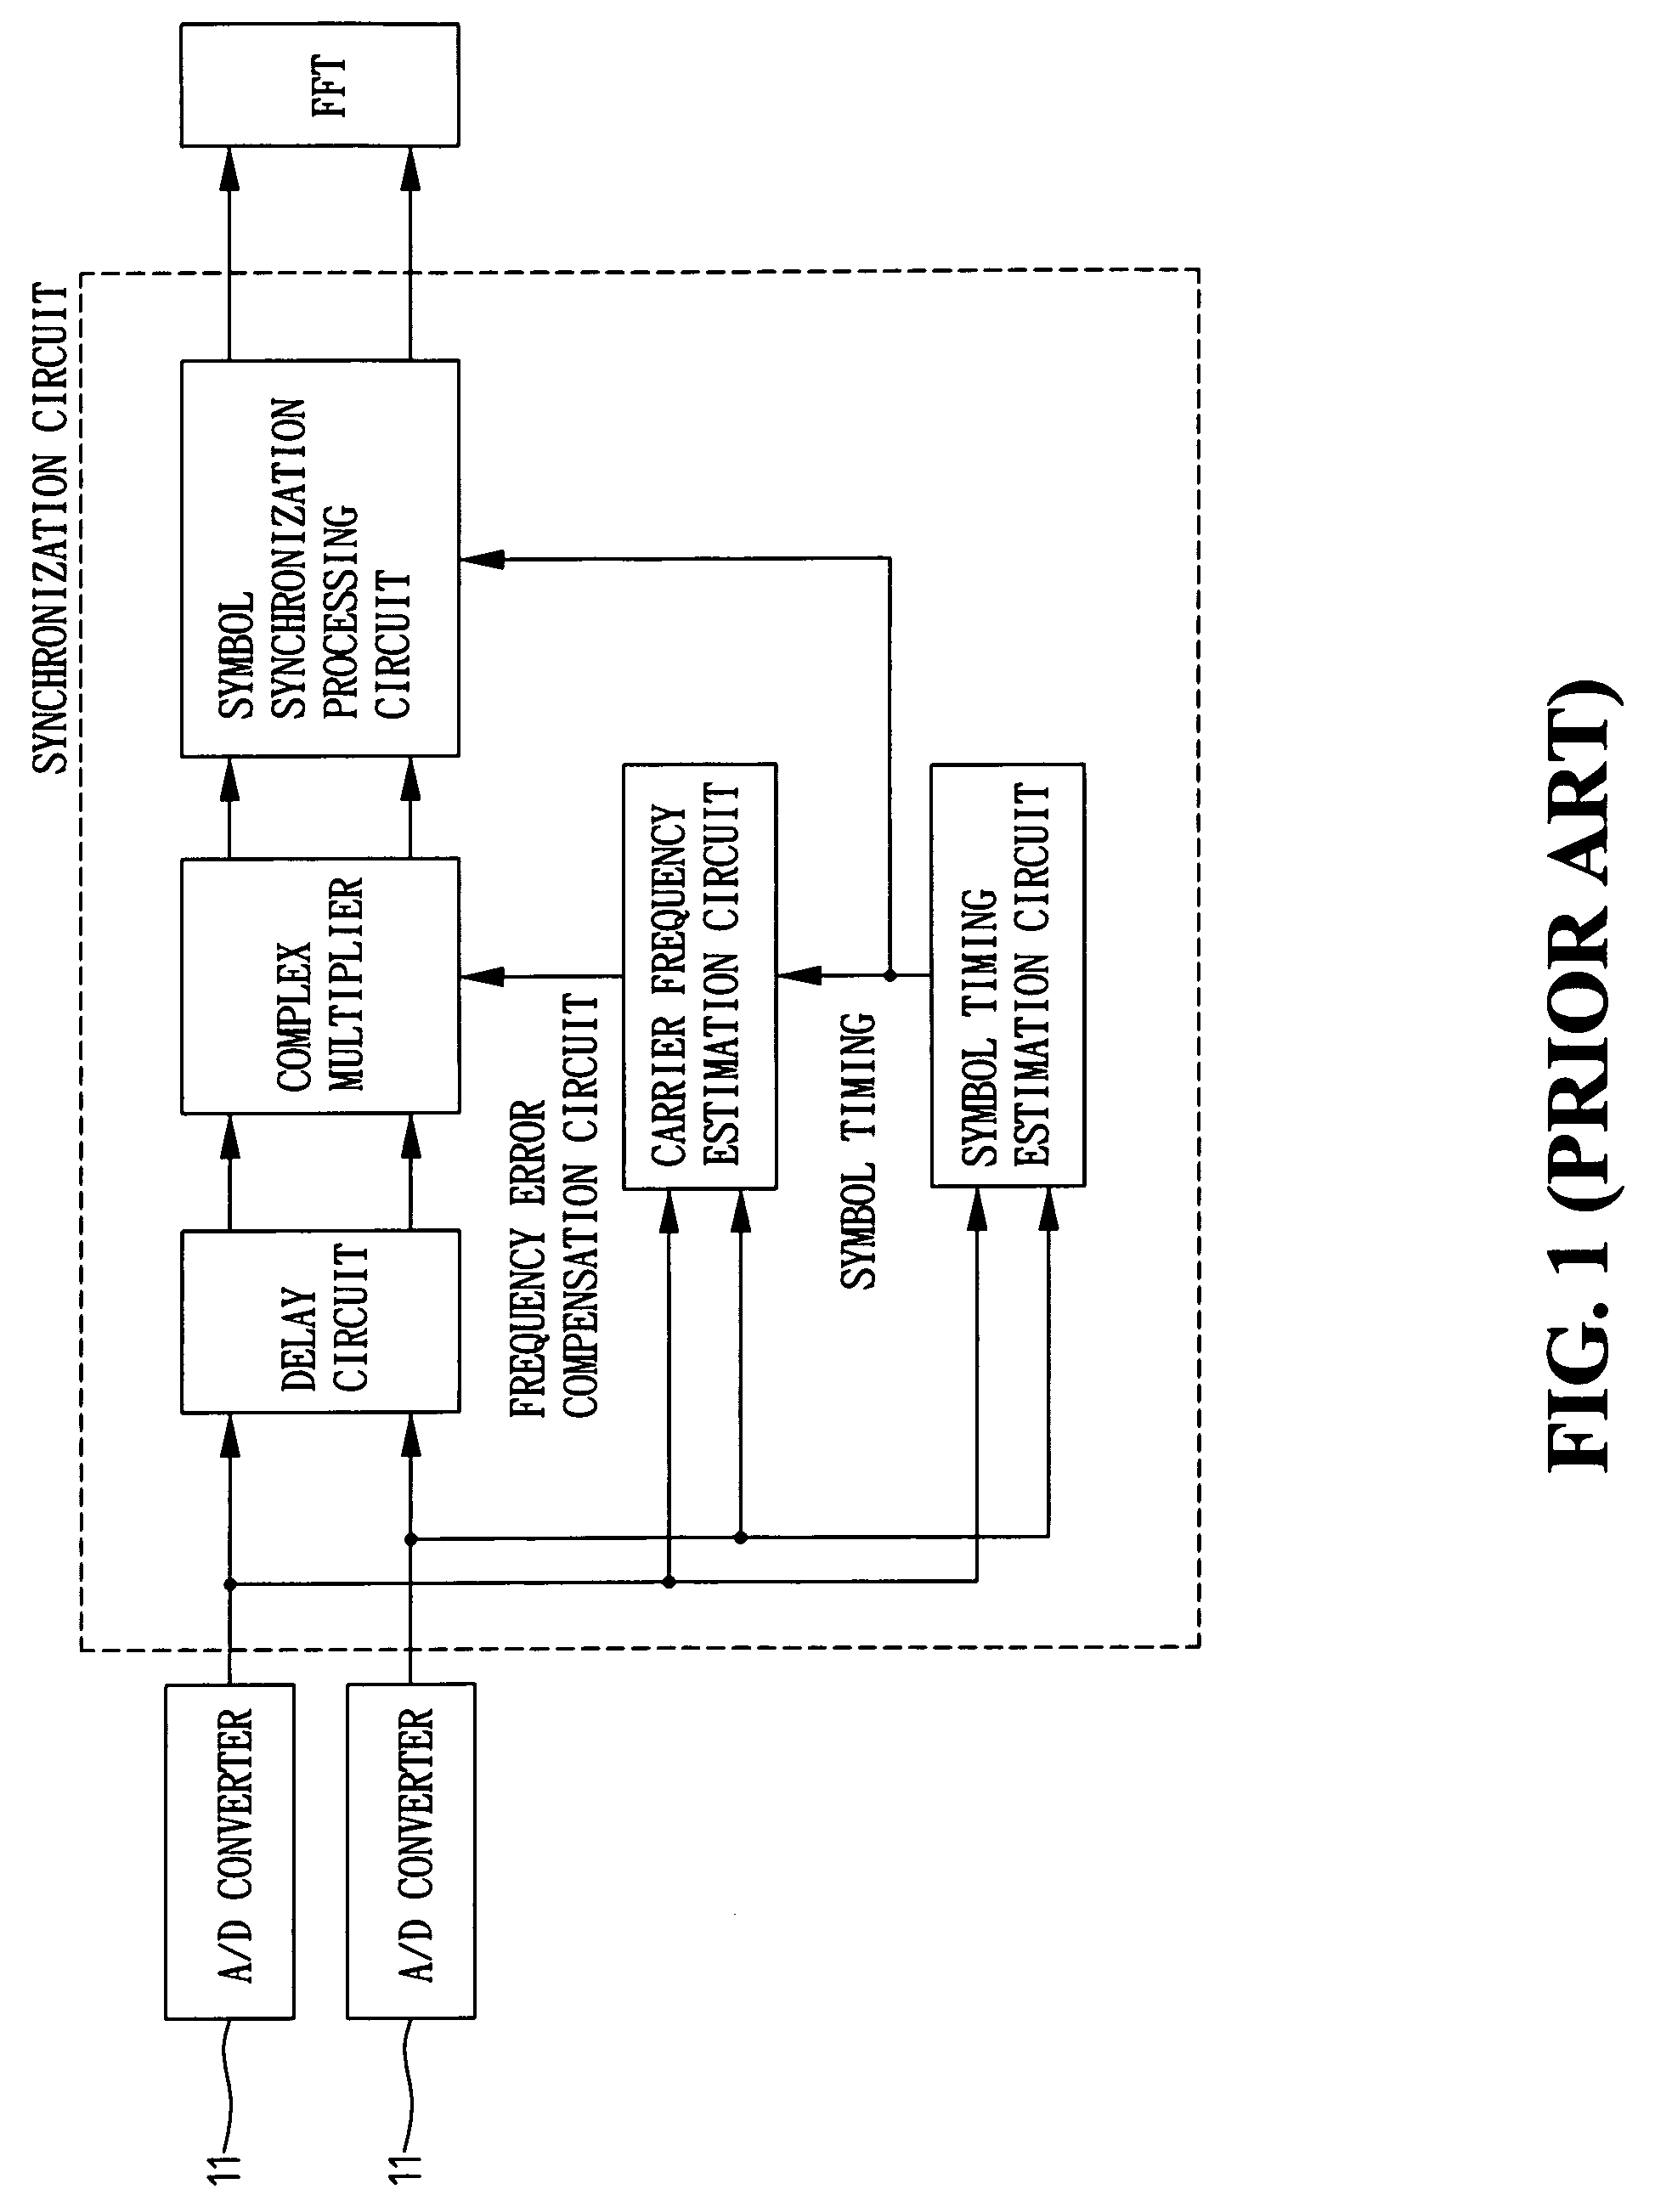 Method for detecting signal and estimating symbol timing